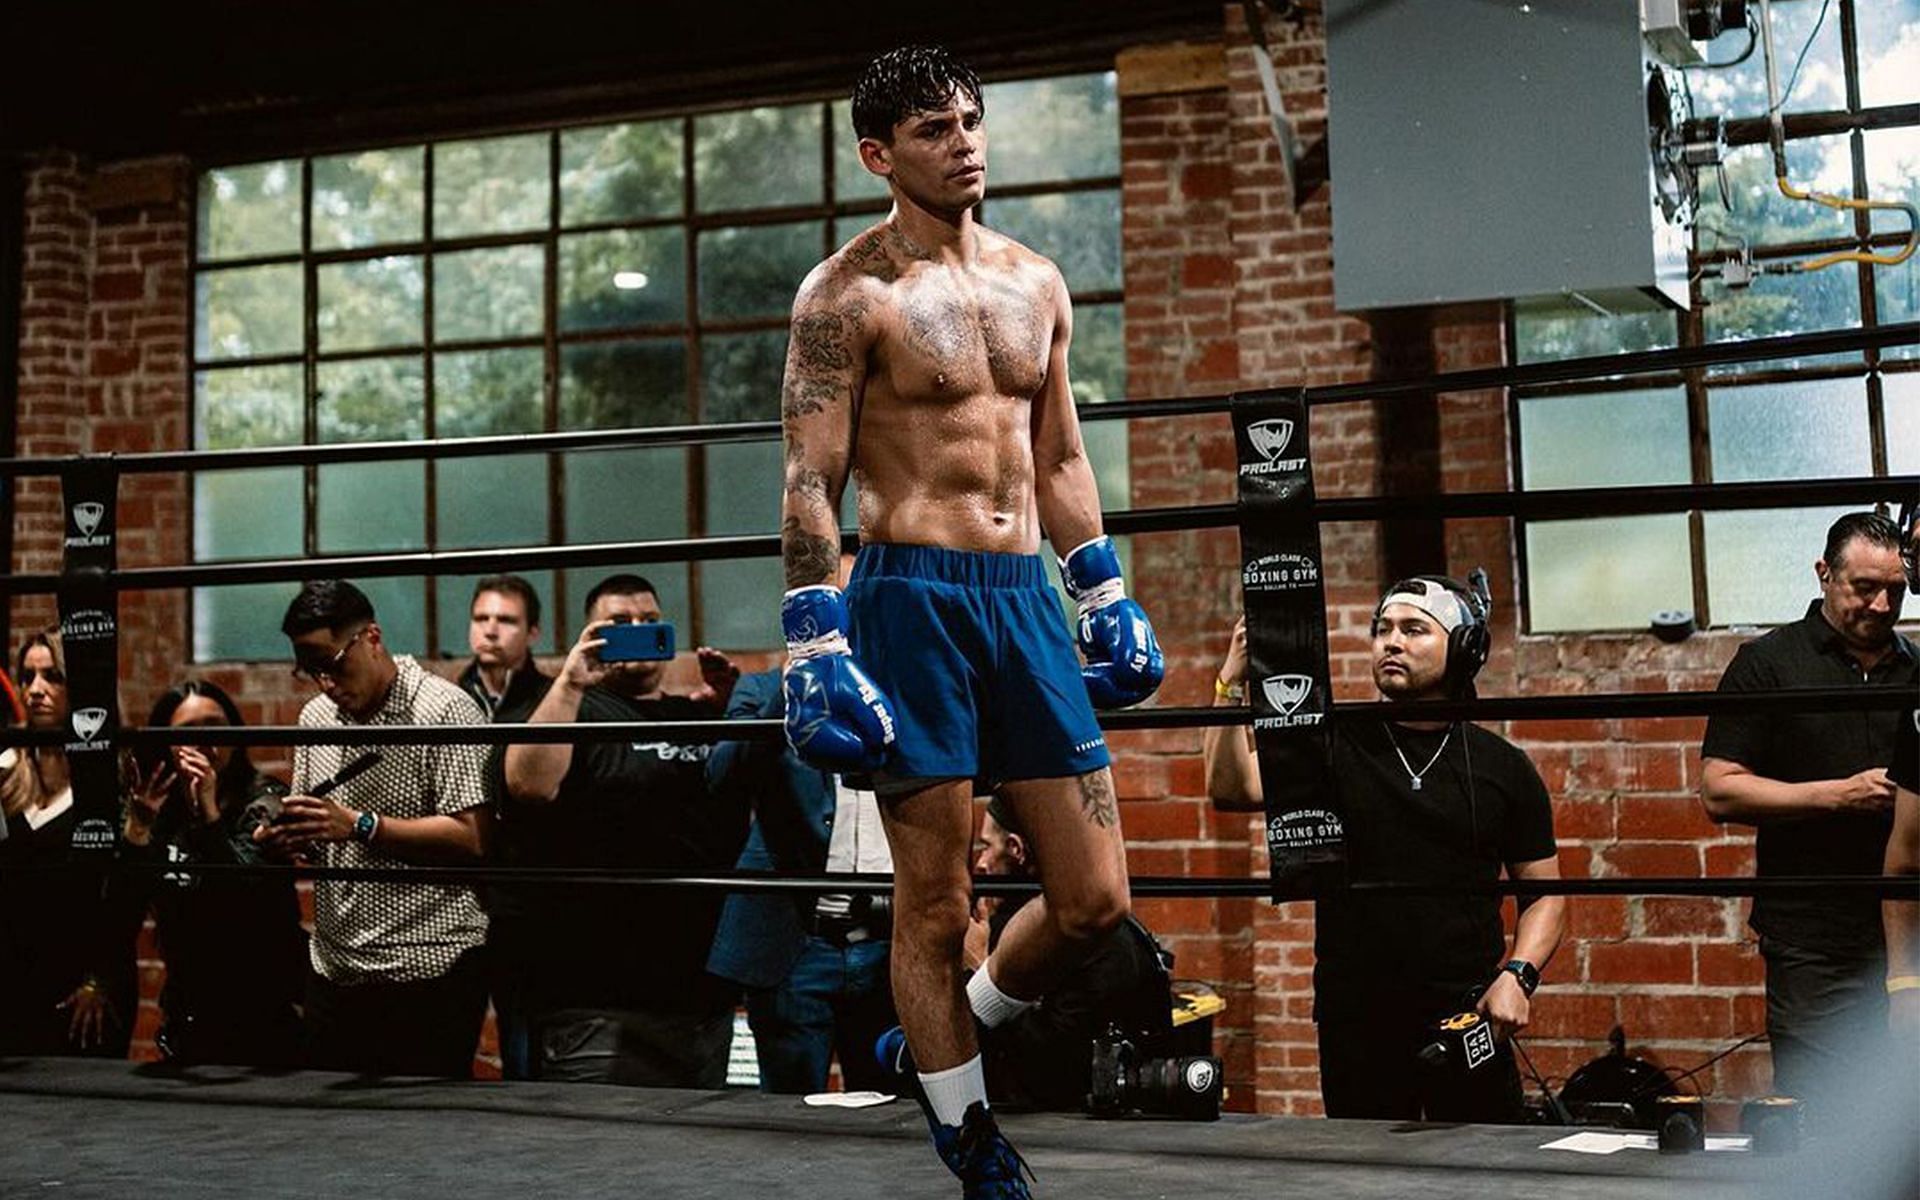 Ryan Garcia is set to compete in the biggest fight of his career [Image Courtesy: @kingryan Instagram]